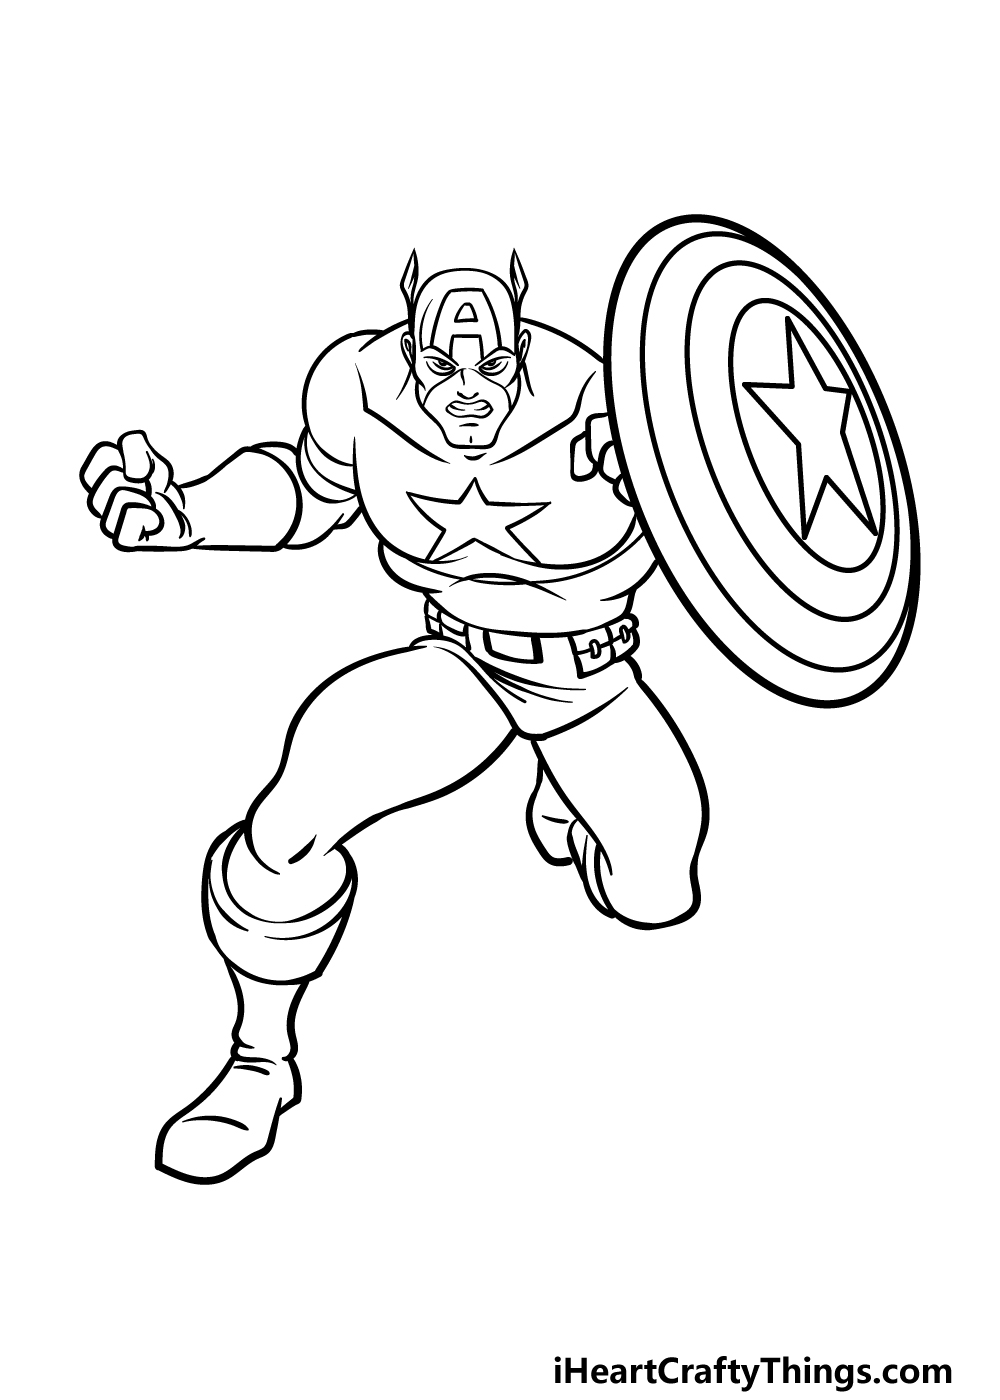 Captain America Drawing - How To Draw Captain America Step By Step